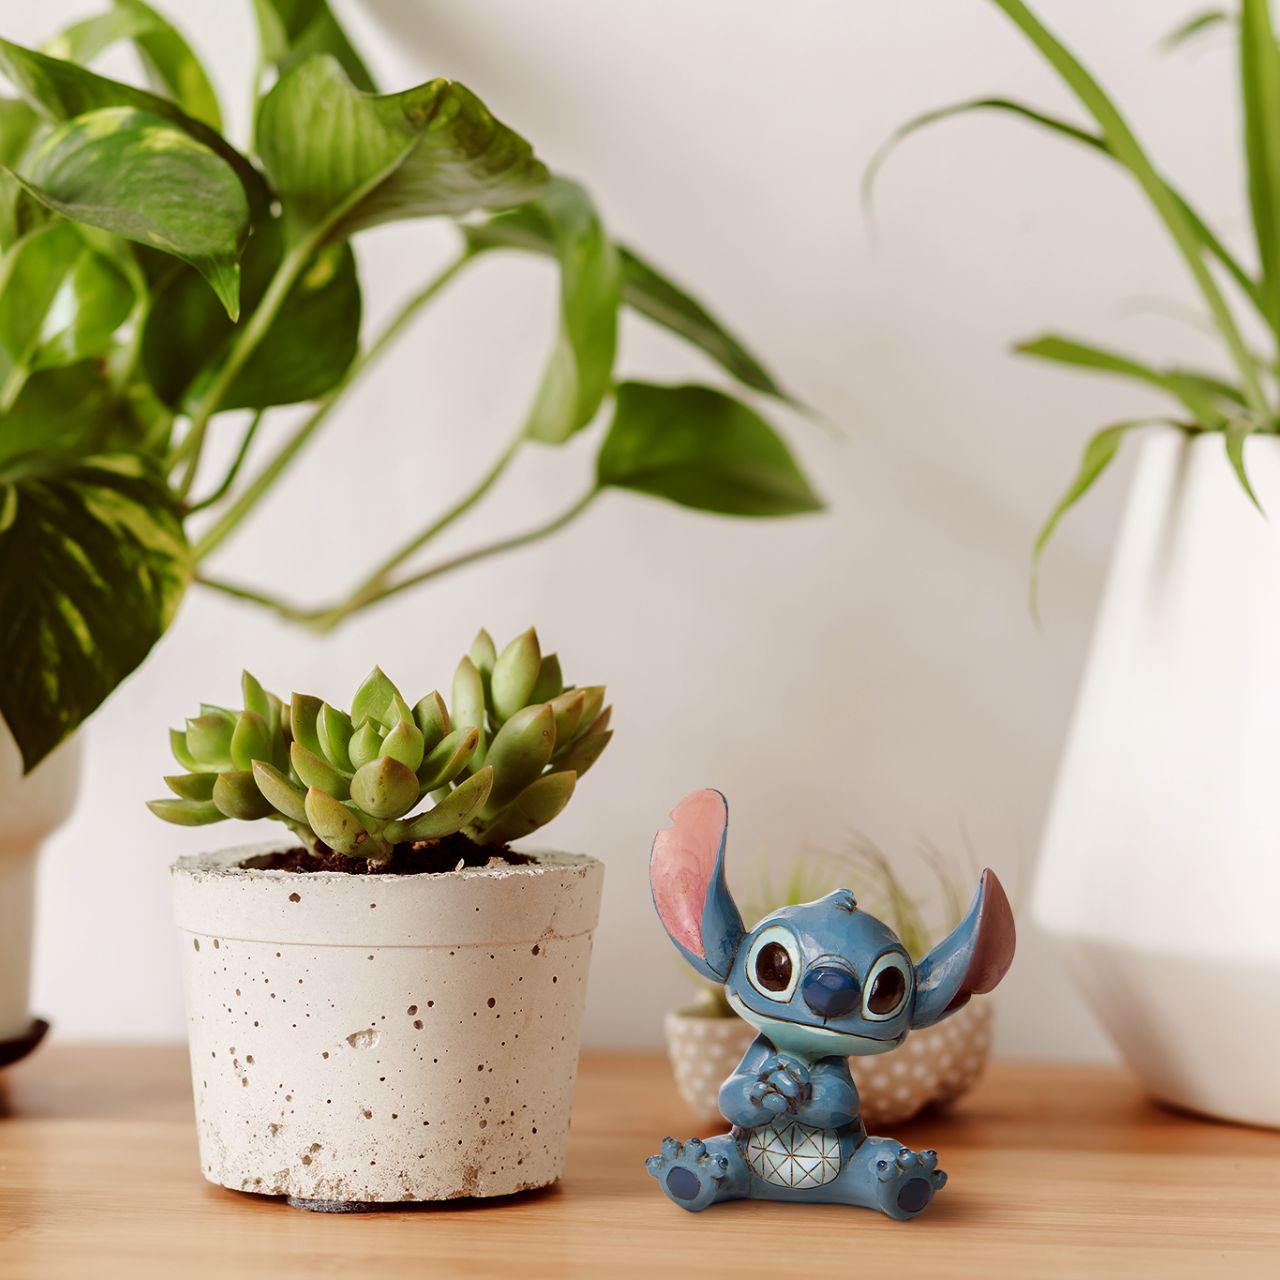 Jim Shore Stitch Mini Figurine  Everyone's favourite alien, Stitch, looks extra adorable in this mini figurine by Jim Shore. Hands clasped, the temperamental alien appears soothed in this figurine, one can only imagine he's listening to Elvis records or watching Lilo hula.